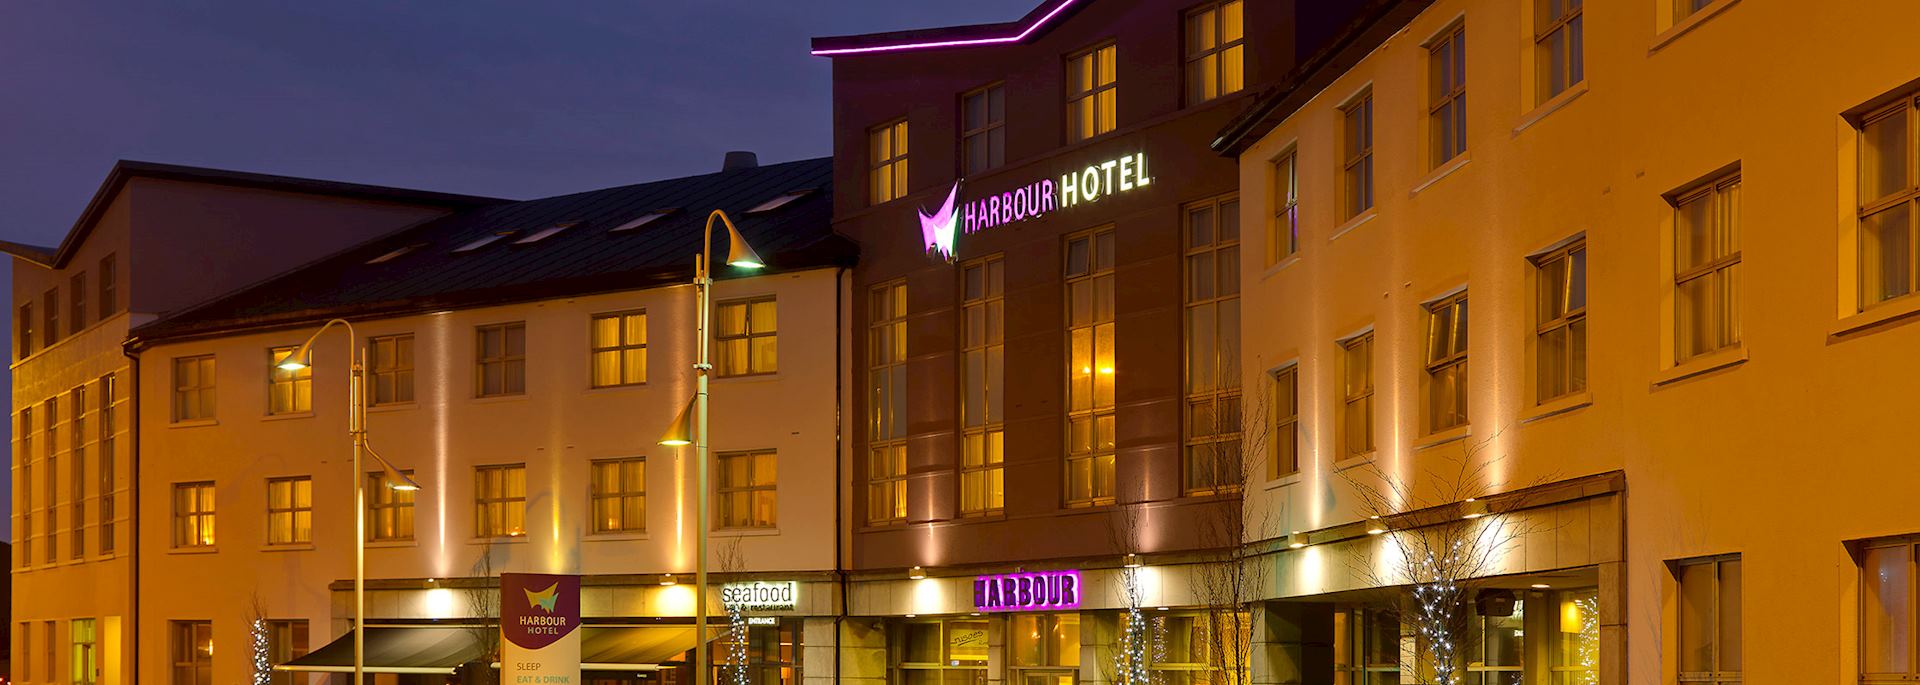 Harbour Hotel, Galway